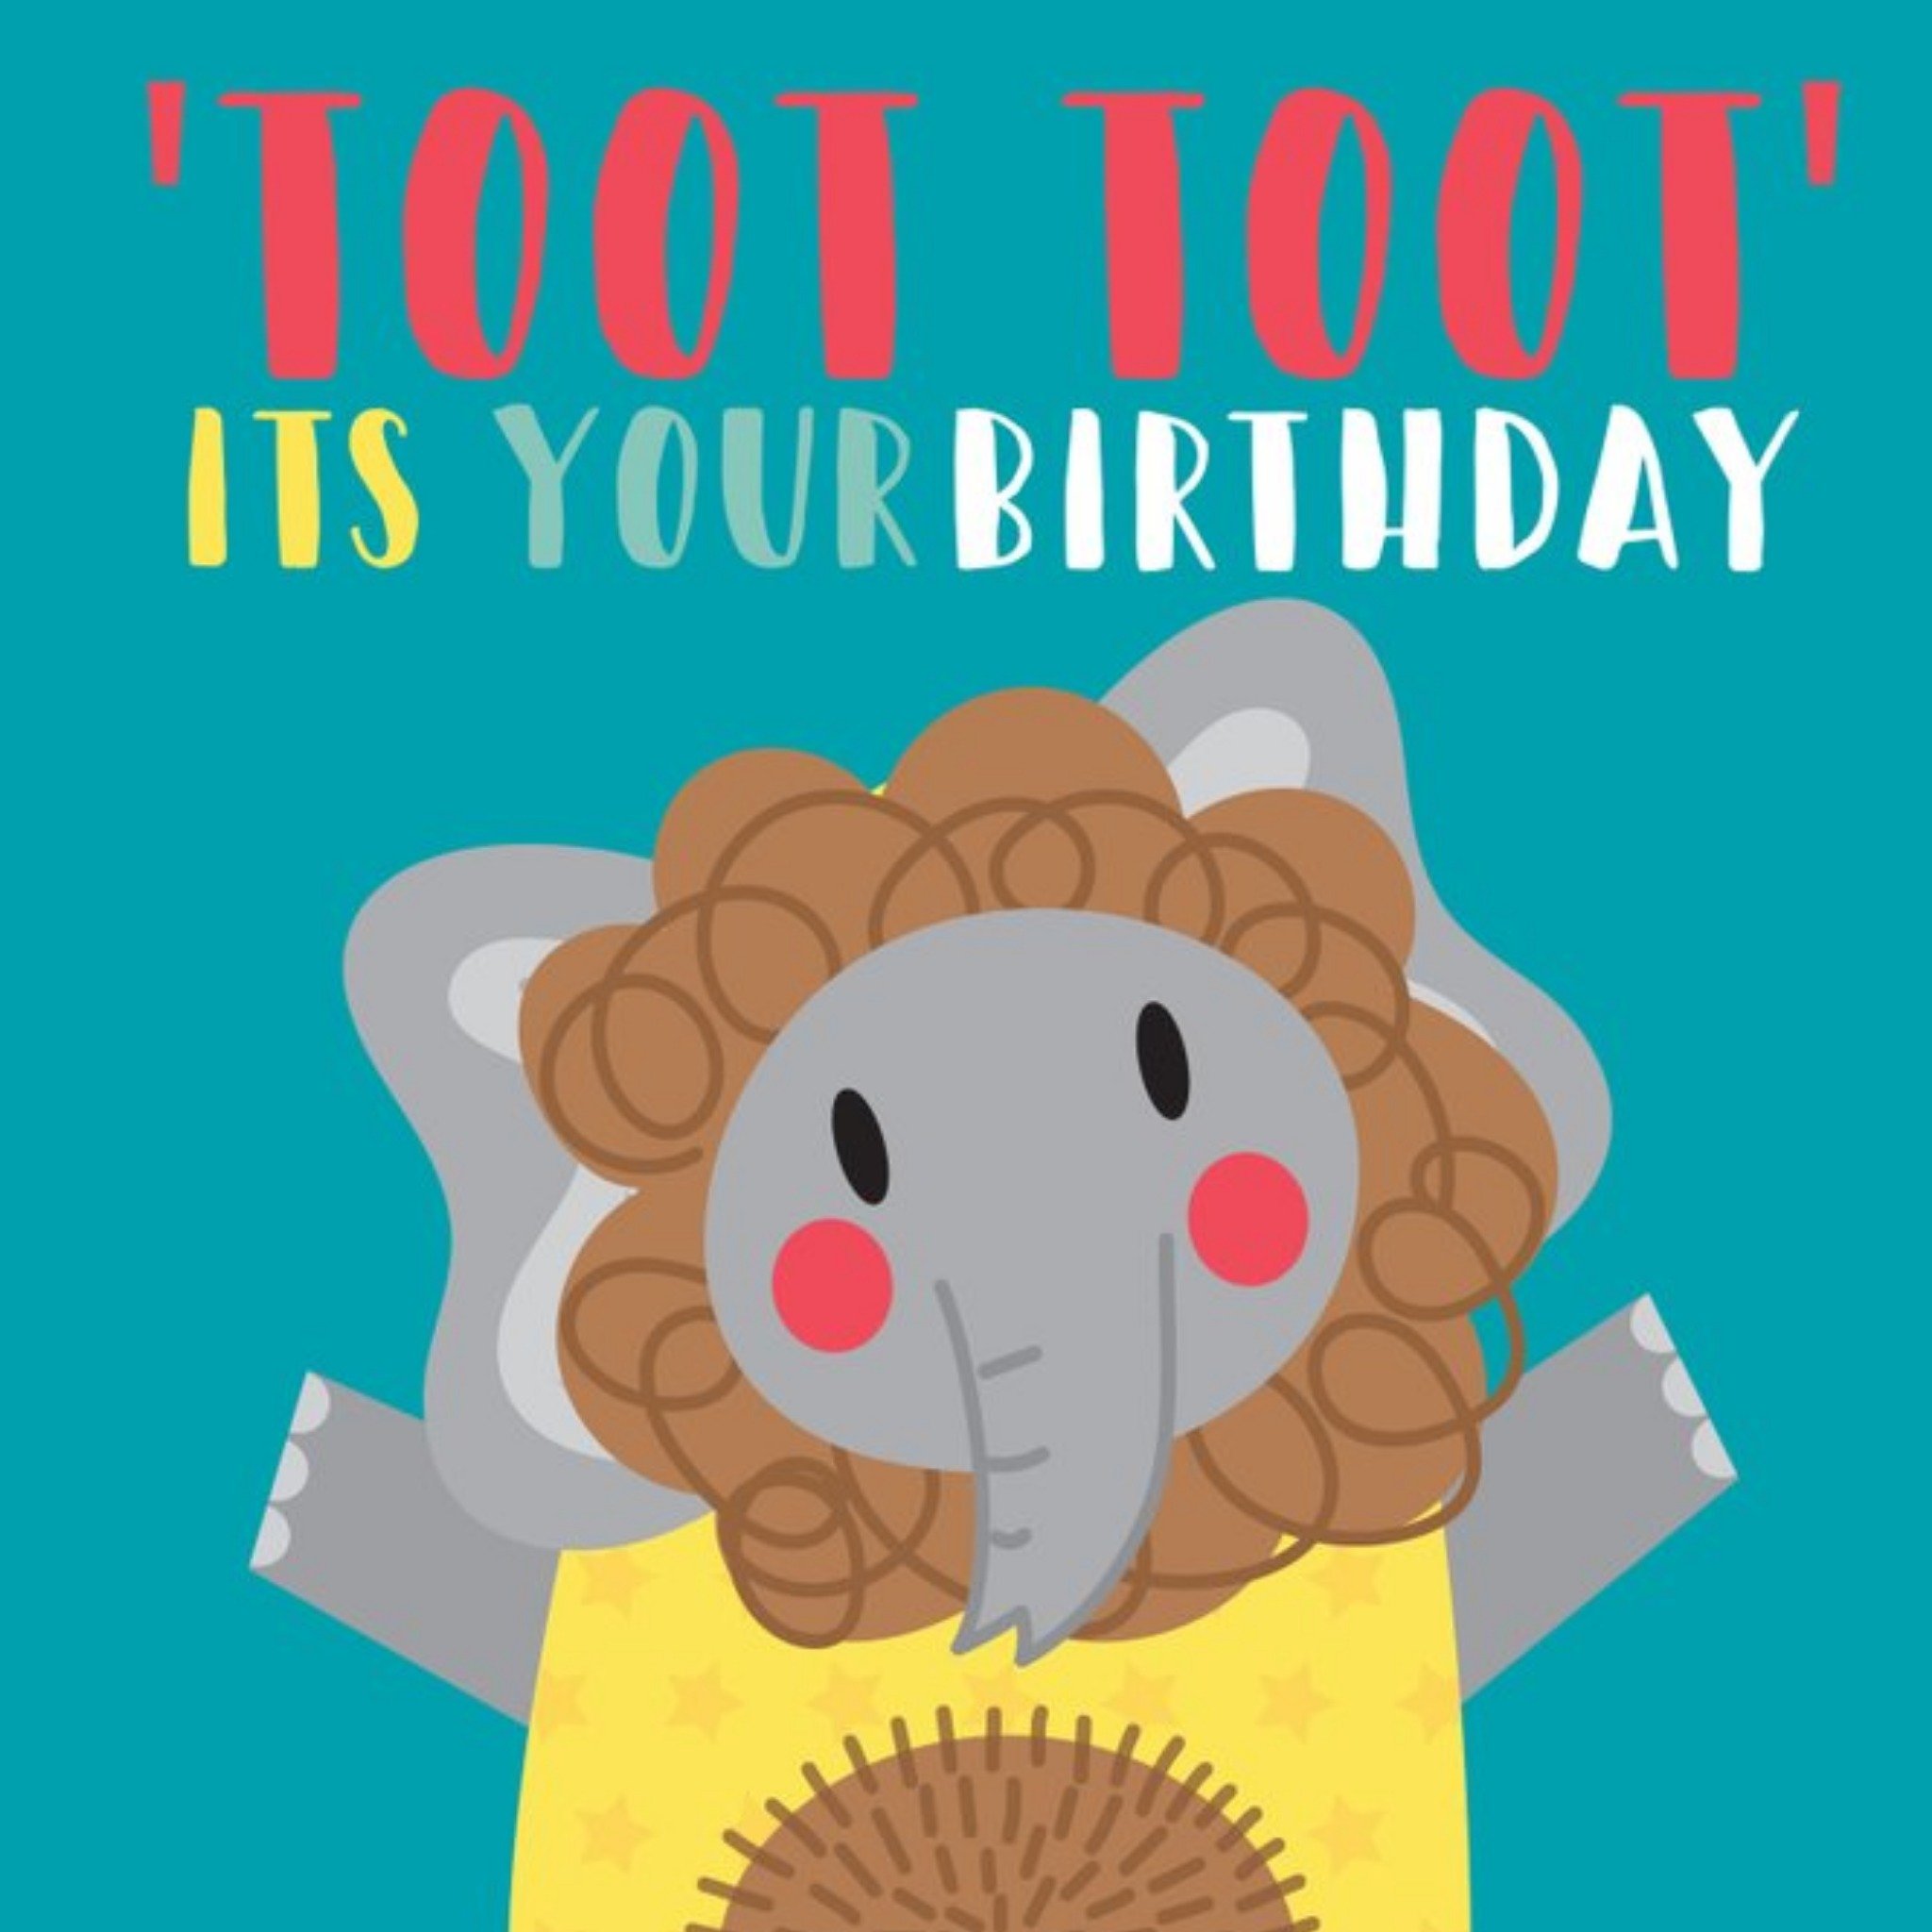 Moonpig Cute Elephant Toot Toot It's Your Birthday Card, Square